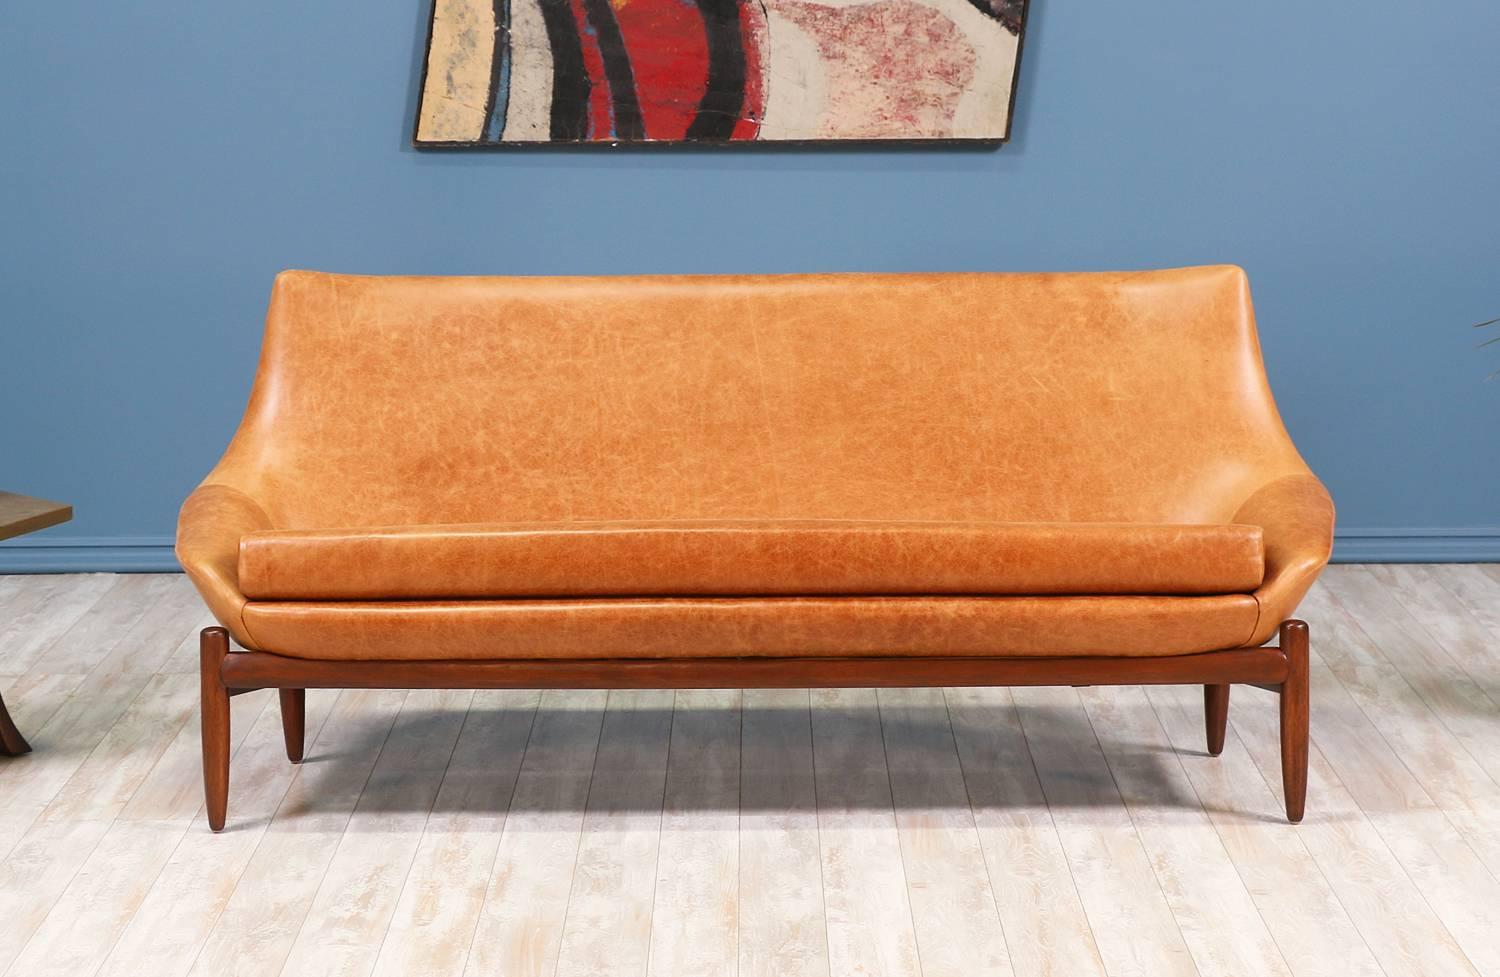 Mid-Century modern sofa designed and manufactured by Danish De Luxe in Australia circa 1960’s. This unique sofa features a solid walnut wood sculptural base with a comfortable seat that has been reupholstered in an elegant full-grain cognac leather.